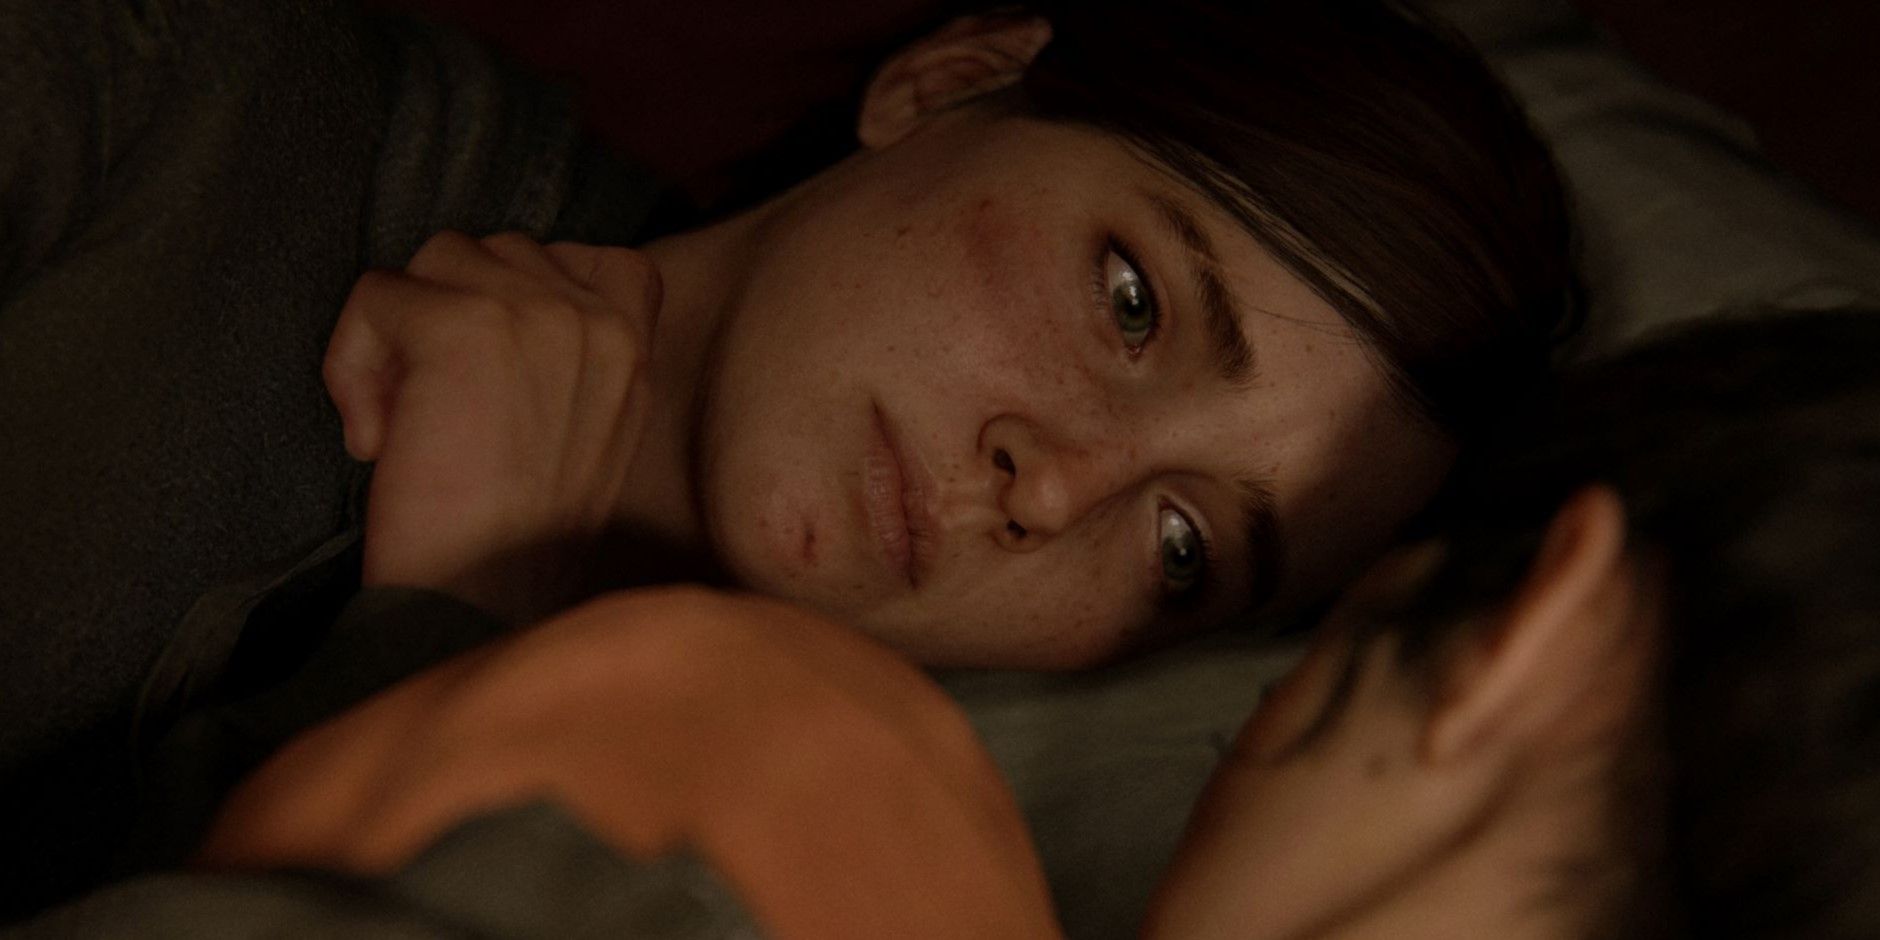 The Last of Us 2 review roundup